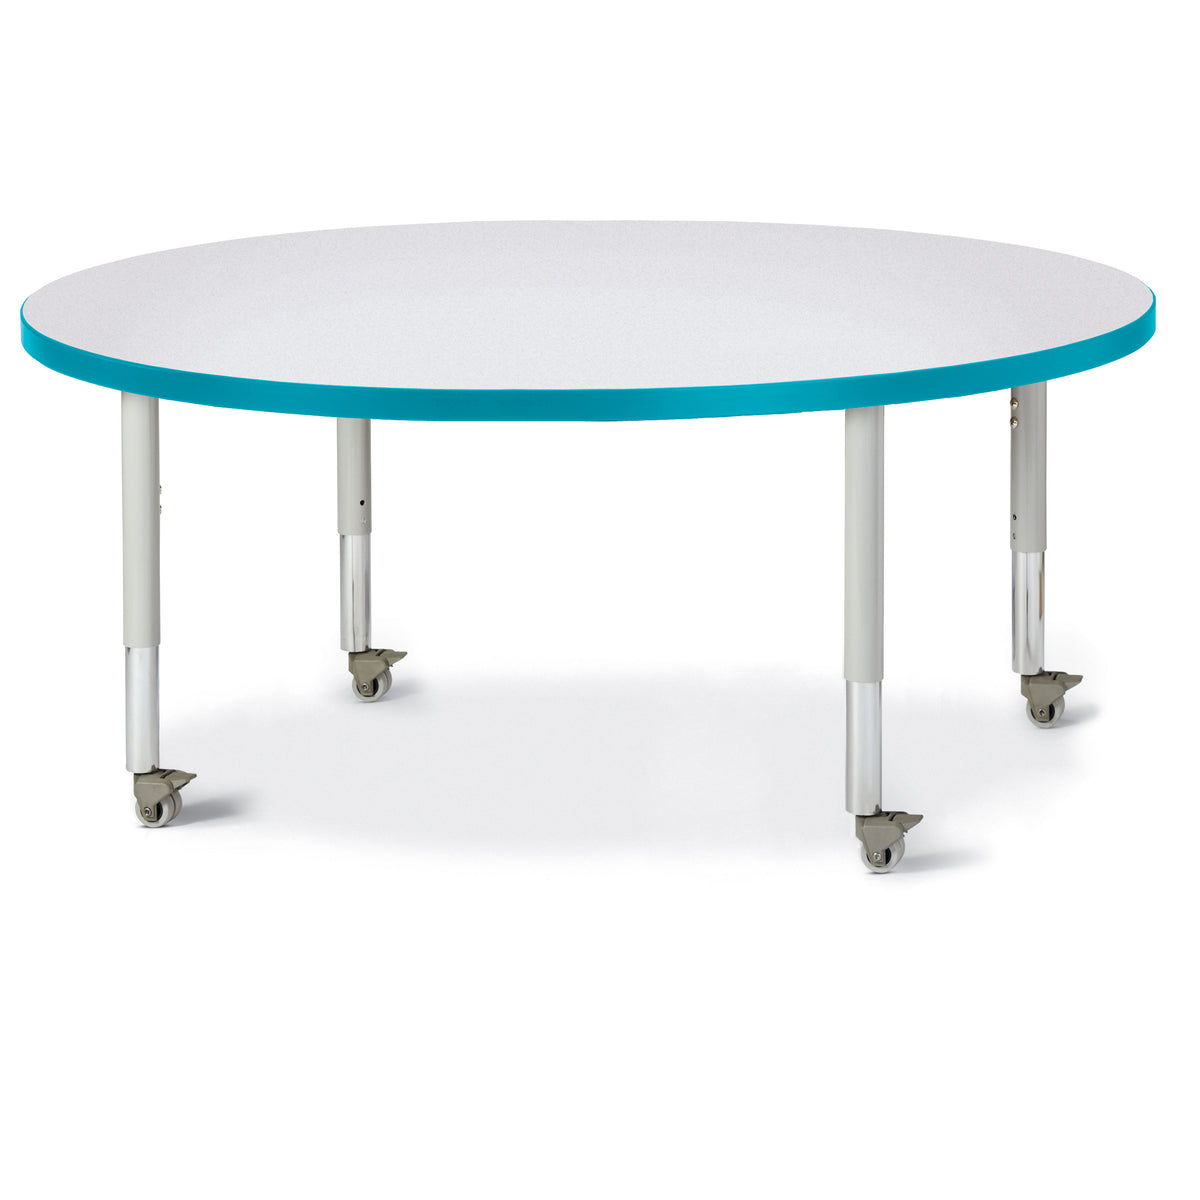 6433JCM005, Berries Round Activity Table - 48" Diameter, Mobile - Freckled Gray/Teal/Gray